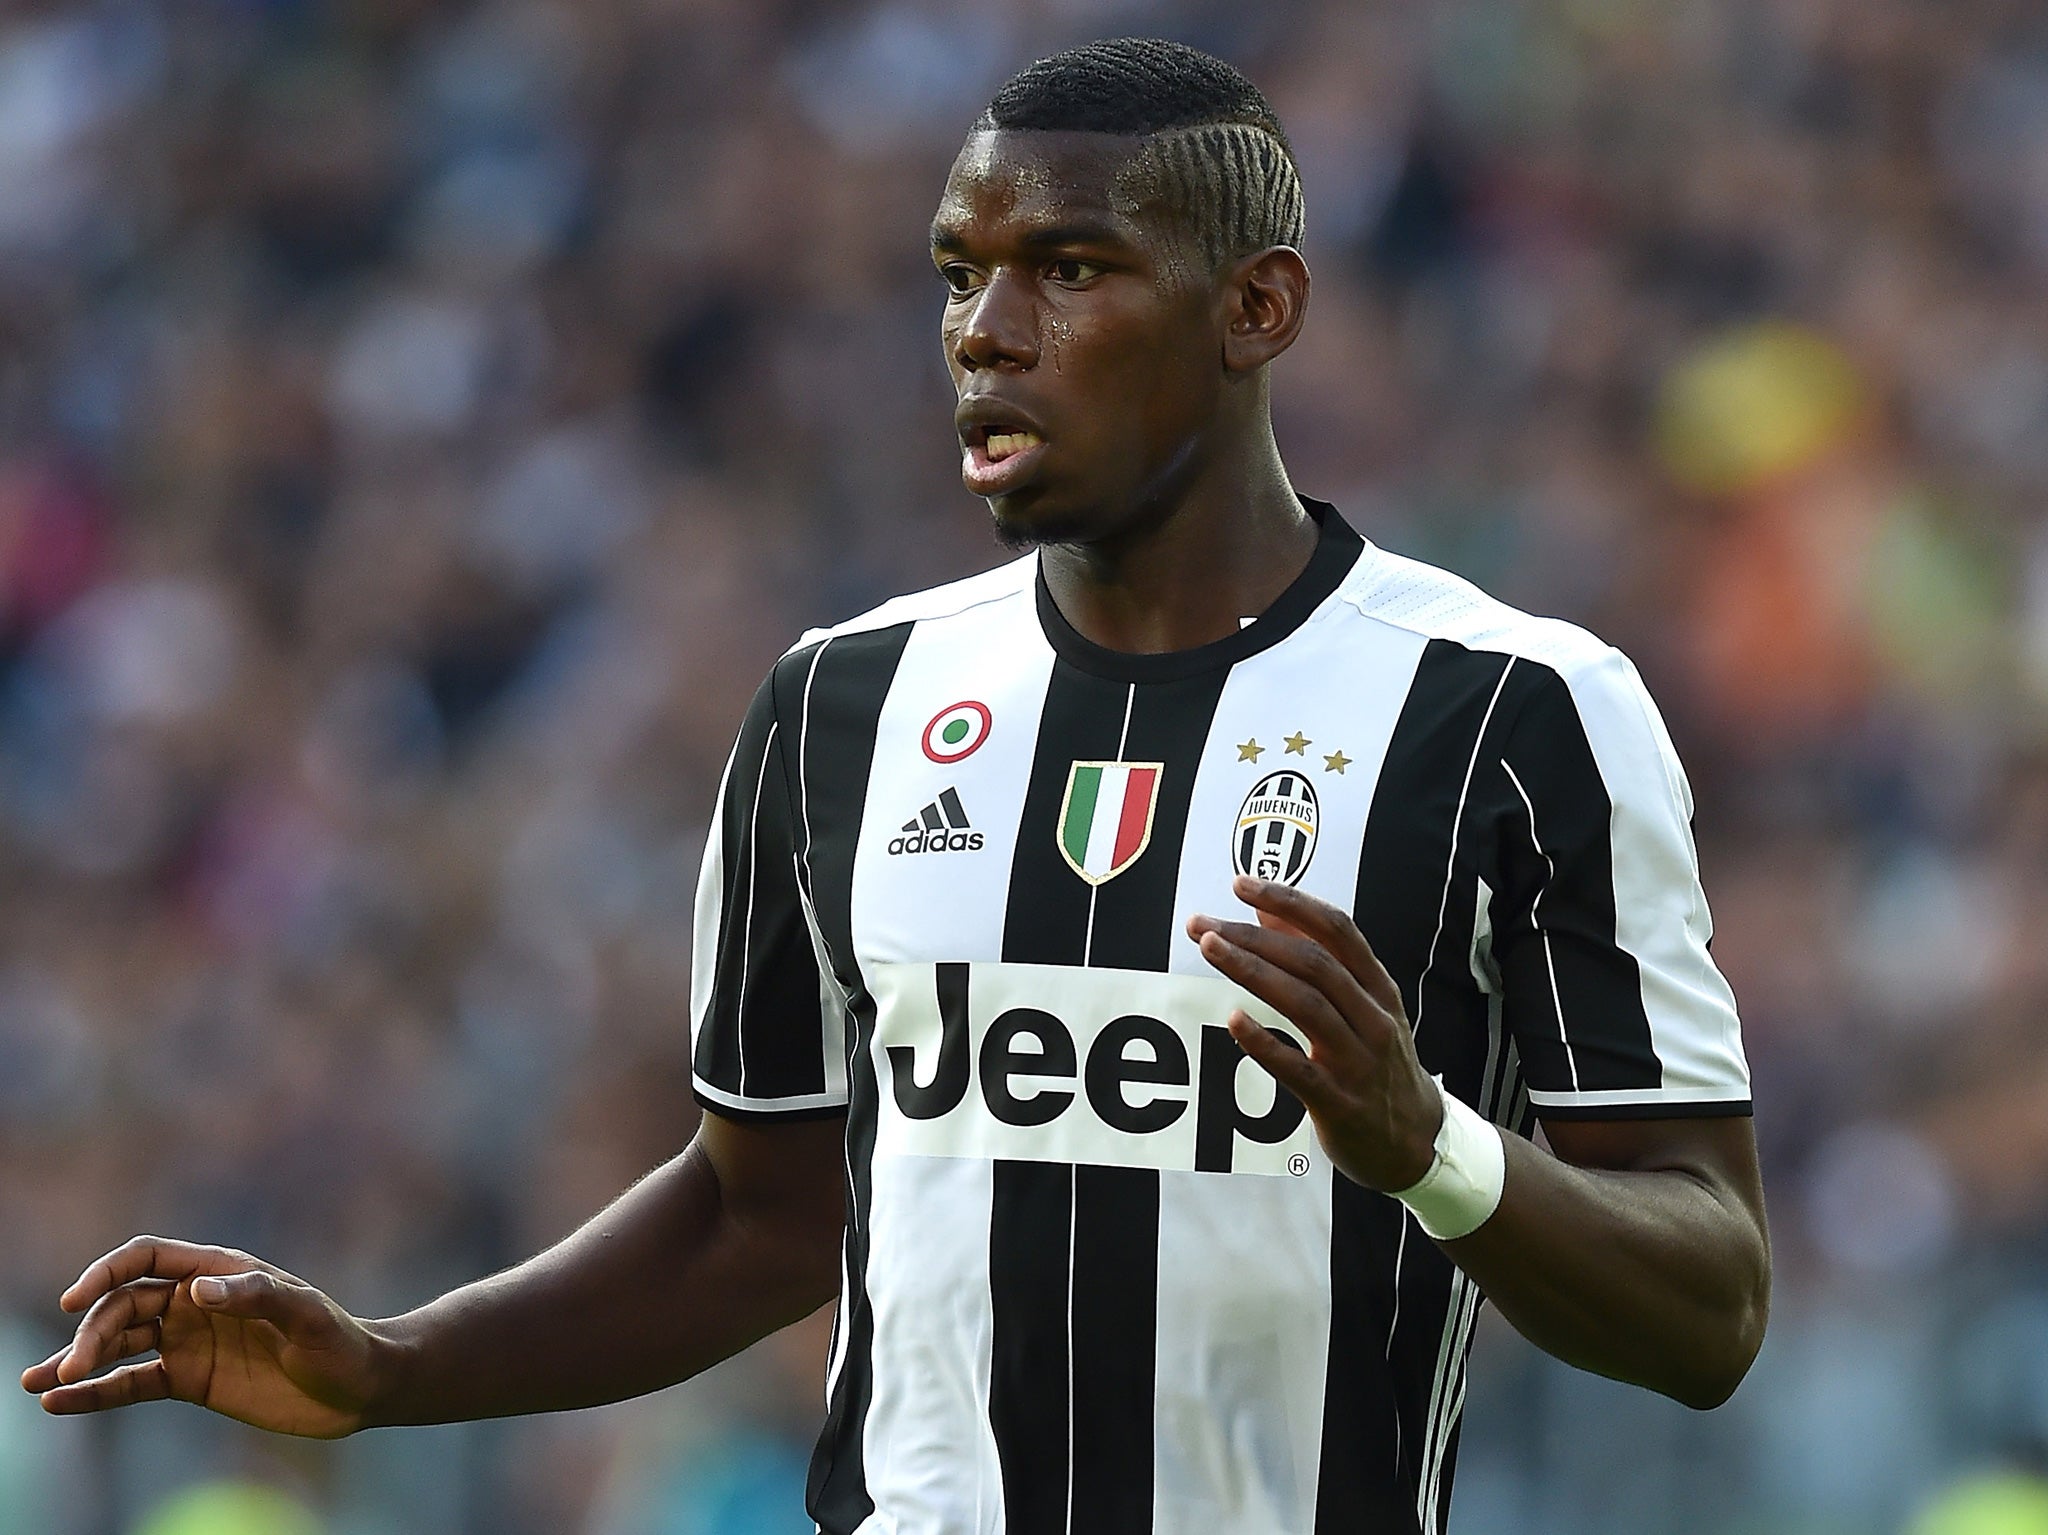 Paul Pogba welcomes 3rd child